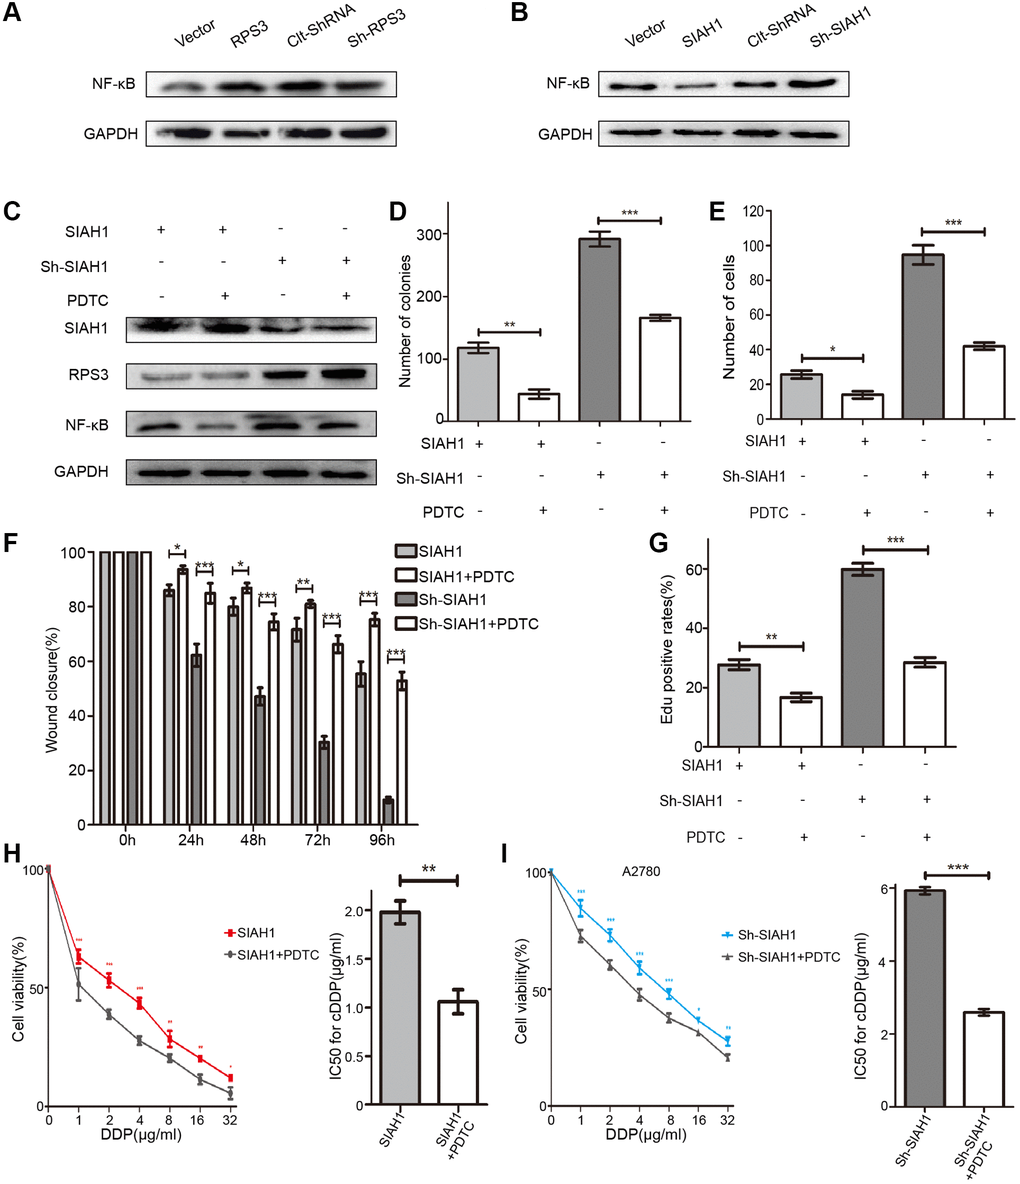 SIAH1 inhibits the NF-κB pathway via RPS3 downregulation. (A) Western blotting for NF-κB p65 in A2780 cells separately transfected with Vector, SIAH1, Clt-shRNA and sh-SIAH1 for 48 h. (B) Western blotting for NF-κB p65 in A2780 cells separately transfected with Vector, RPS3, Clt-shRNA and sh-RPS3 for 48 h. (C) Western blotting for SIAH1, RPS3 and NF-κB p65 in A2780 cells separately transfected with SIAH1and sh-SIAH1 for 48 h, and treated with PDTC (200 μM) for 24 h. A2780 cells were separately transfected with SIAH1 and sh-SIAH1 for 48 h and treated with PDTC for 24 h. The number of Cell Colonies was determined (D), the cell number of Transwell assay was obtained (E), the Wound closure percentage was calculated (0, 24, 48, 72 and 96 h) (F), and the Edu positive rates (G), cell viability (H, I left panels), and IC50 for cDDP (H, I right panels) were measured in A2780 cells. *p **p ***p 